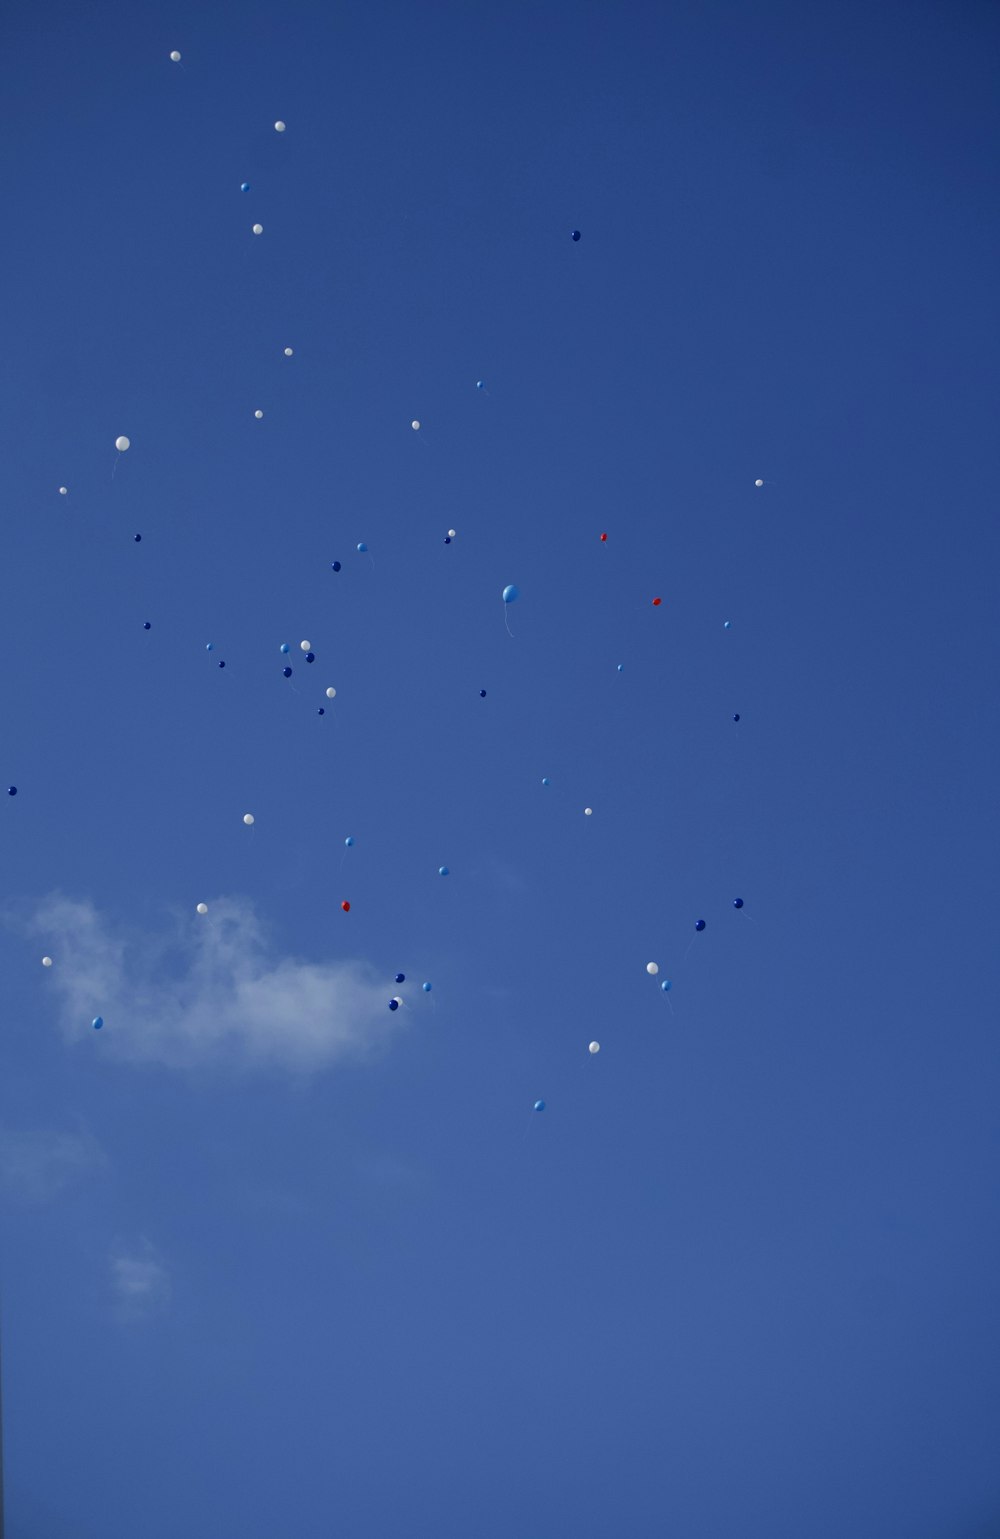 a bunch of balloons are flying in the sky